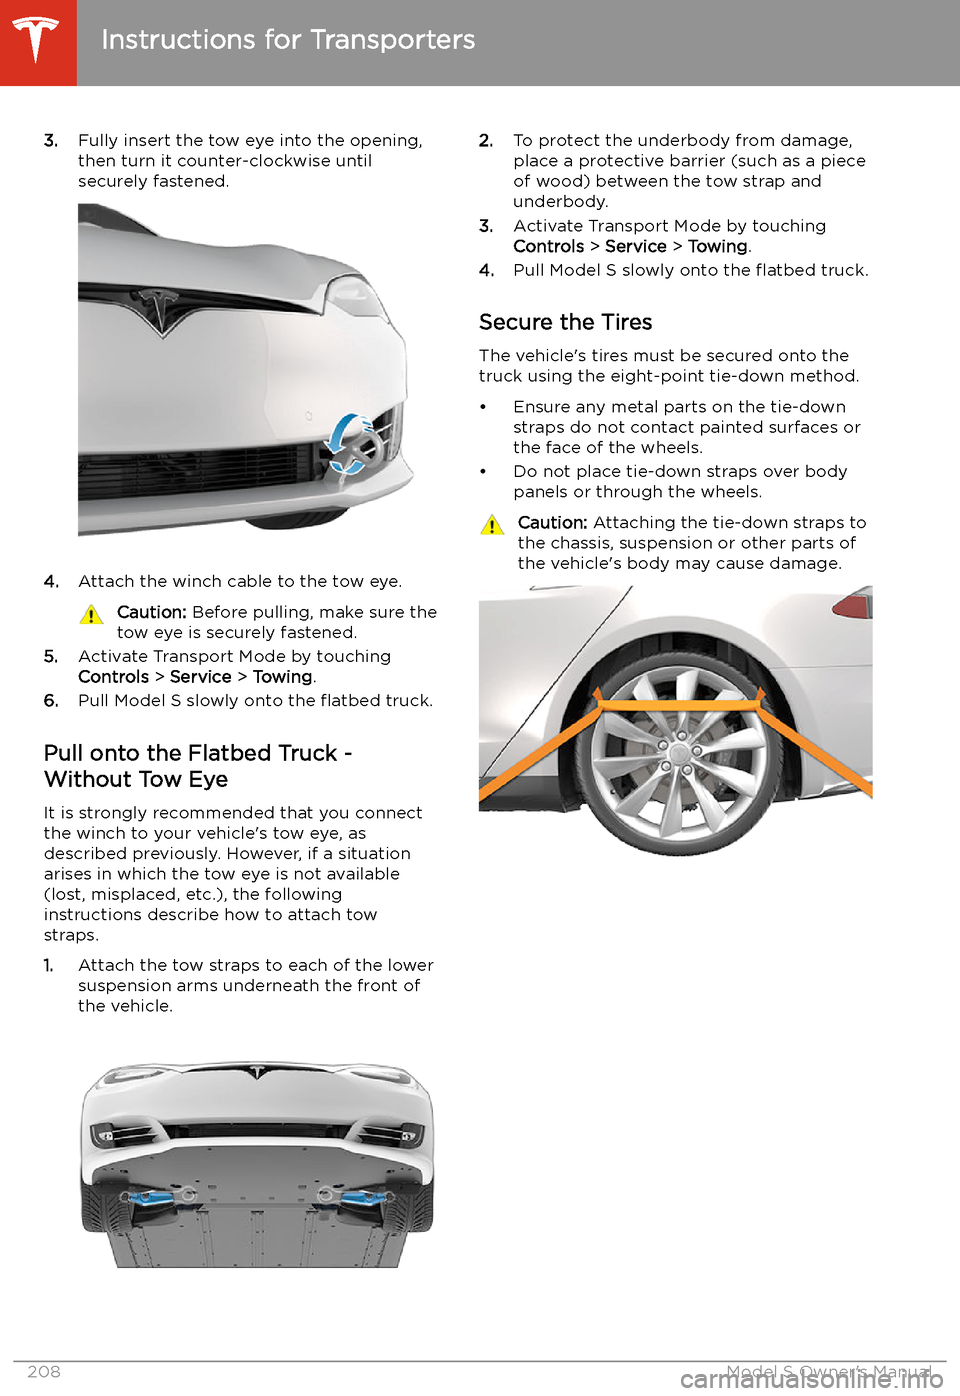 TESLA MODEL S 2020  Owners Manual 3.Fully insert the tow eye into the opening,
then turn it counter-clockwise until
securely fastened.
4. Attach the winch cable to the tow eye.
Caution:  Before pulling, make sure the
tow eye is secure